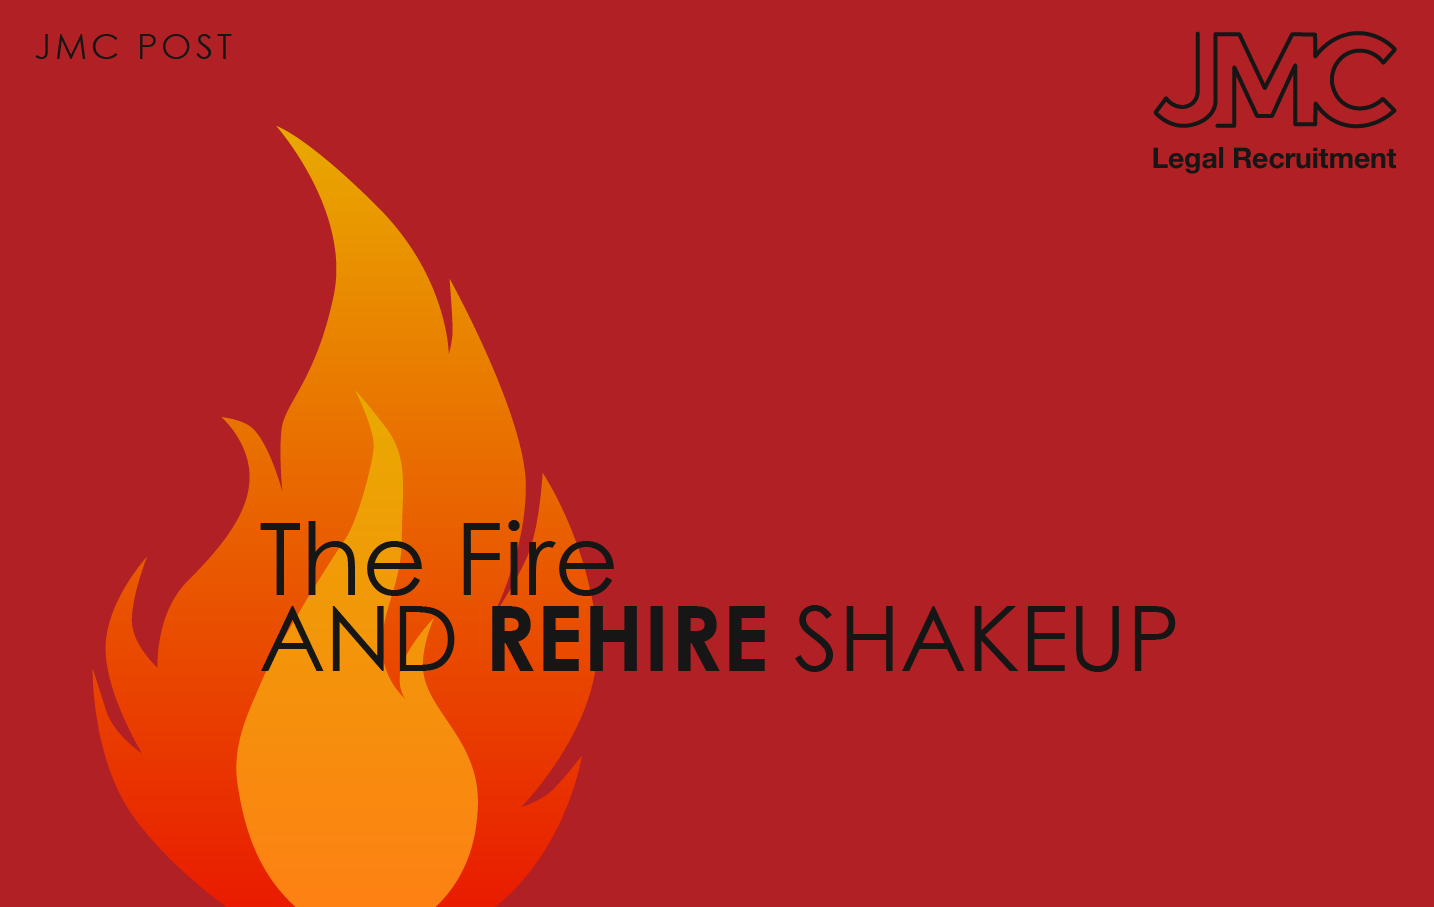 The Fire and Rehire Shakeup